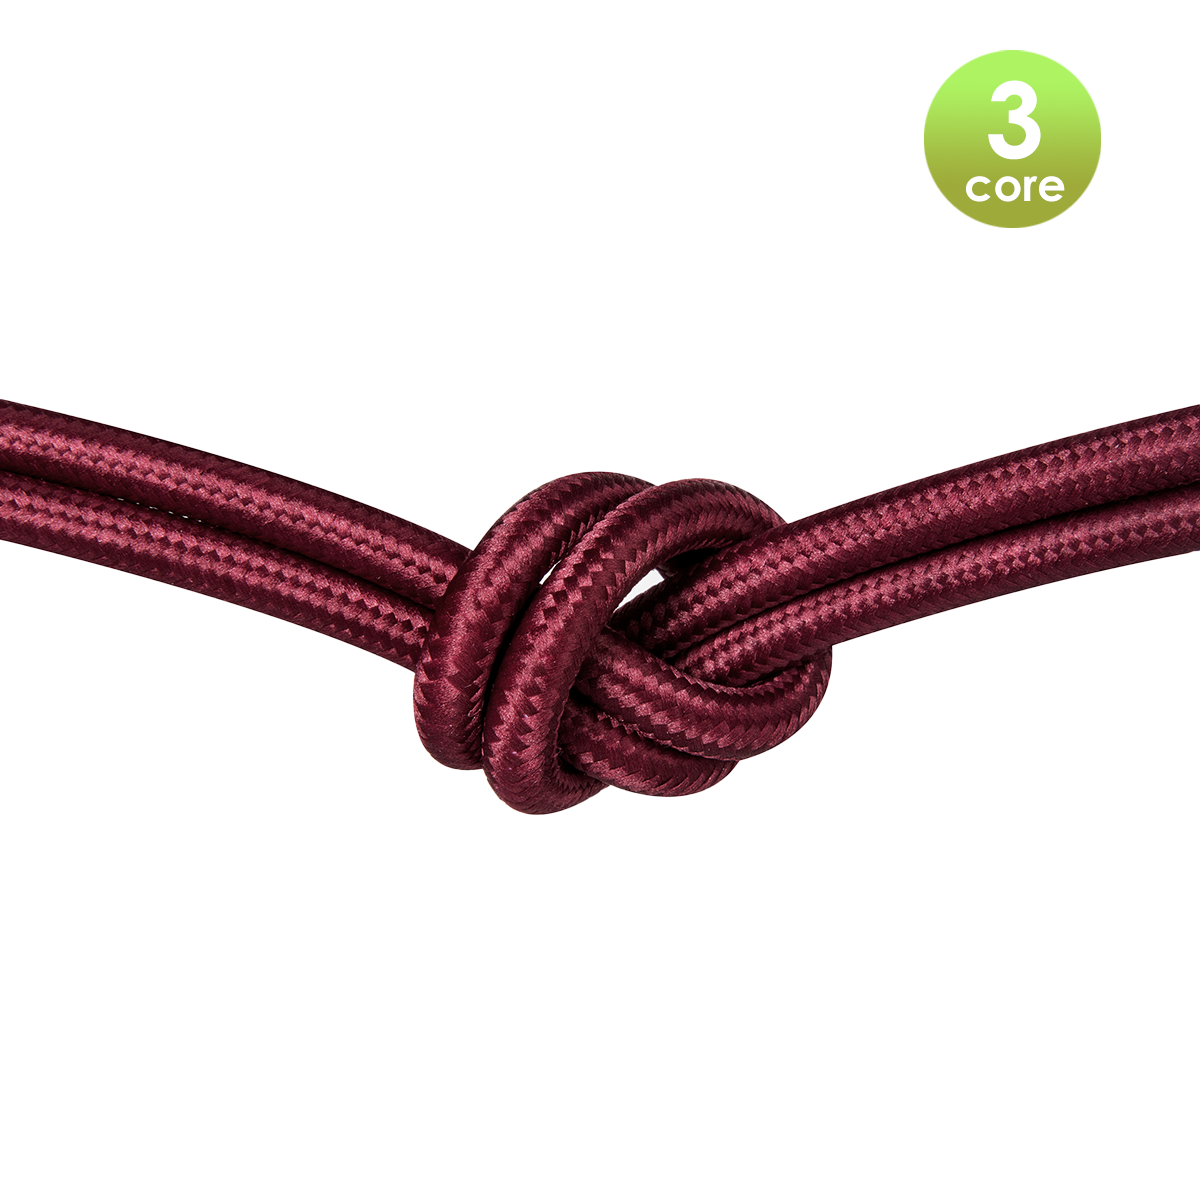 Tangla lighting - TLCB01011RD - 3c - Fabric cable 3 core - in rose red